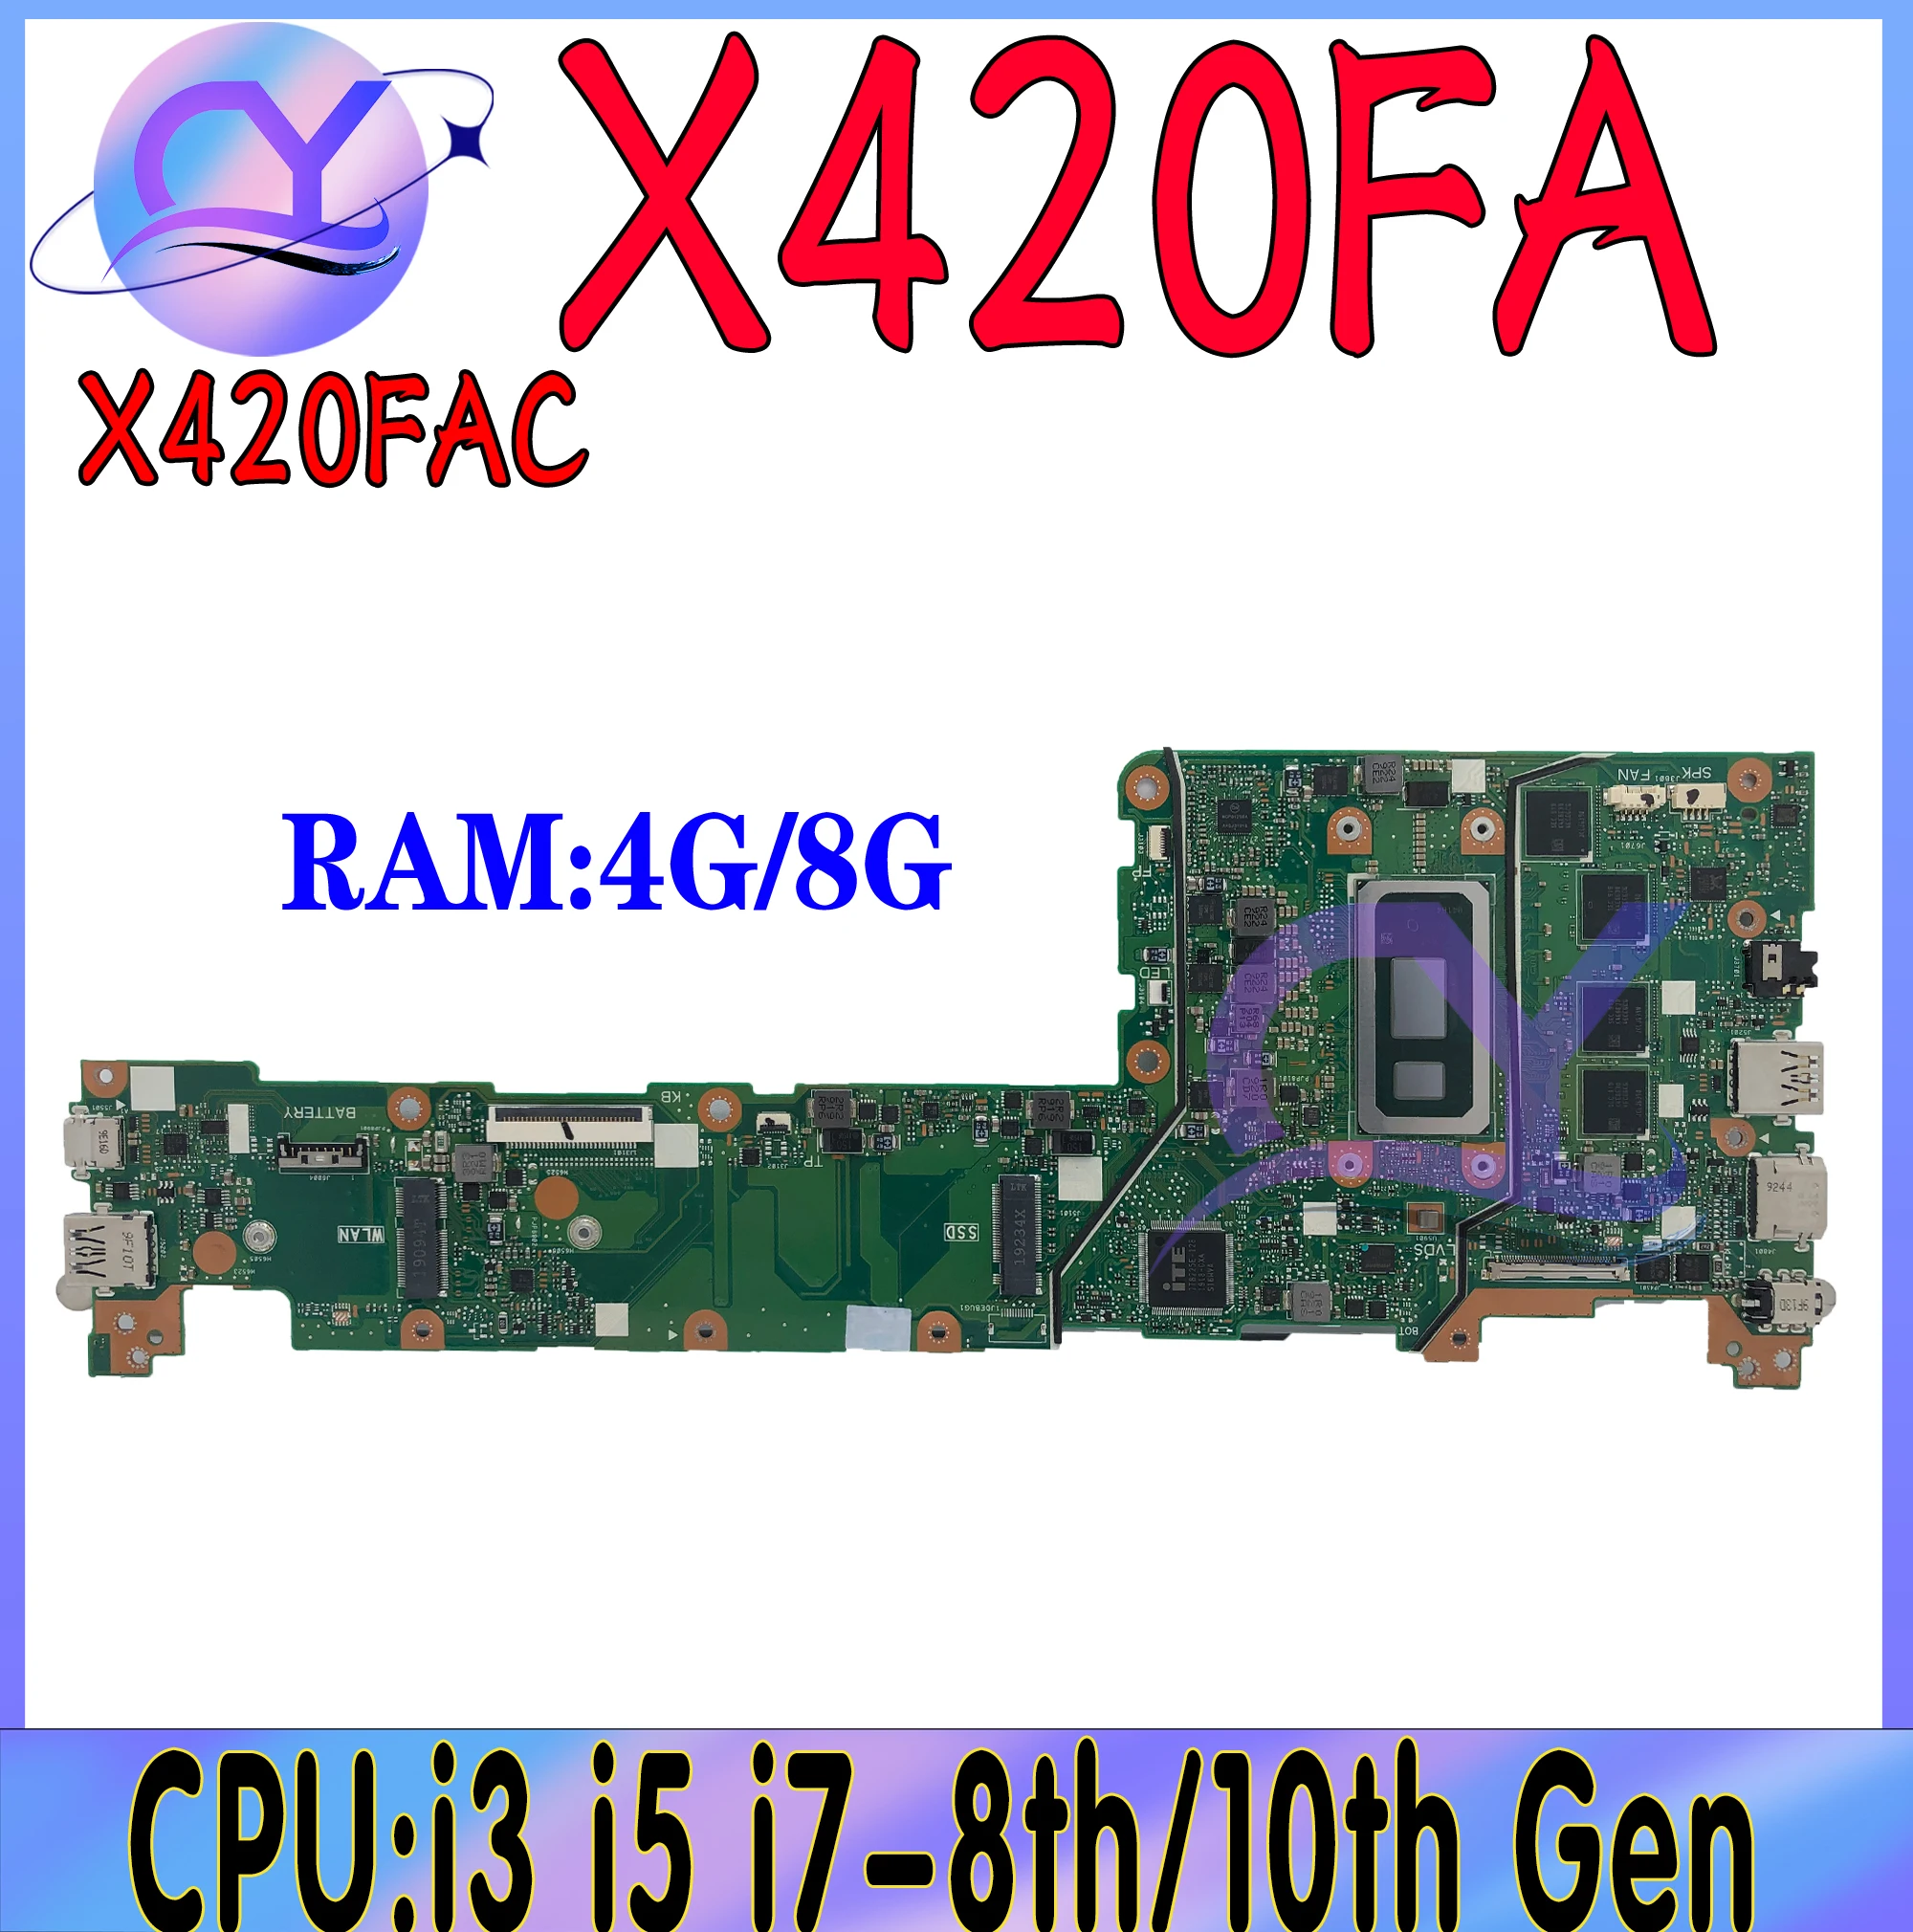 

X420FA Mainboard For ASUS VivoBook 14 X420 X420F Y406F A420F F420F Laptop Motherboard With i3 i5 i7-8th 4G/8G 100% Fully Tested